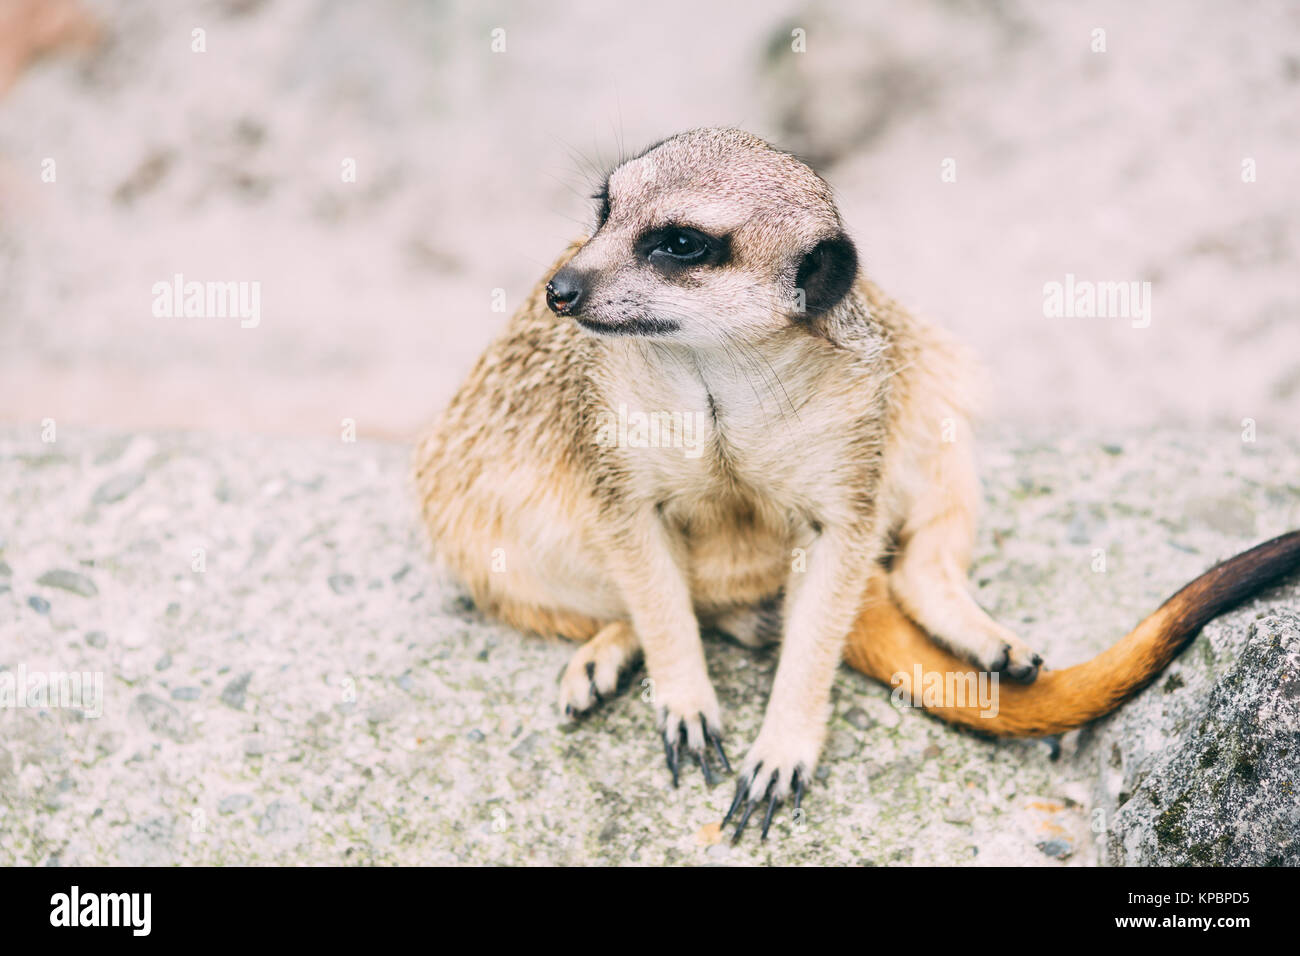 Small meerkat or suricate sitting on a rock Stock Photo